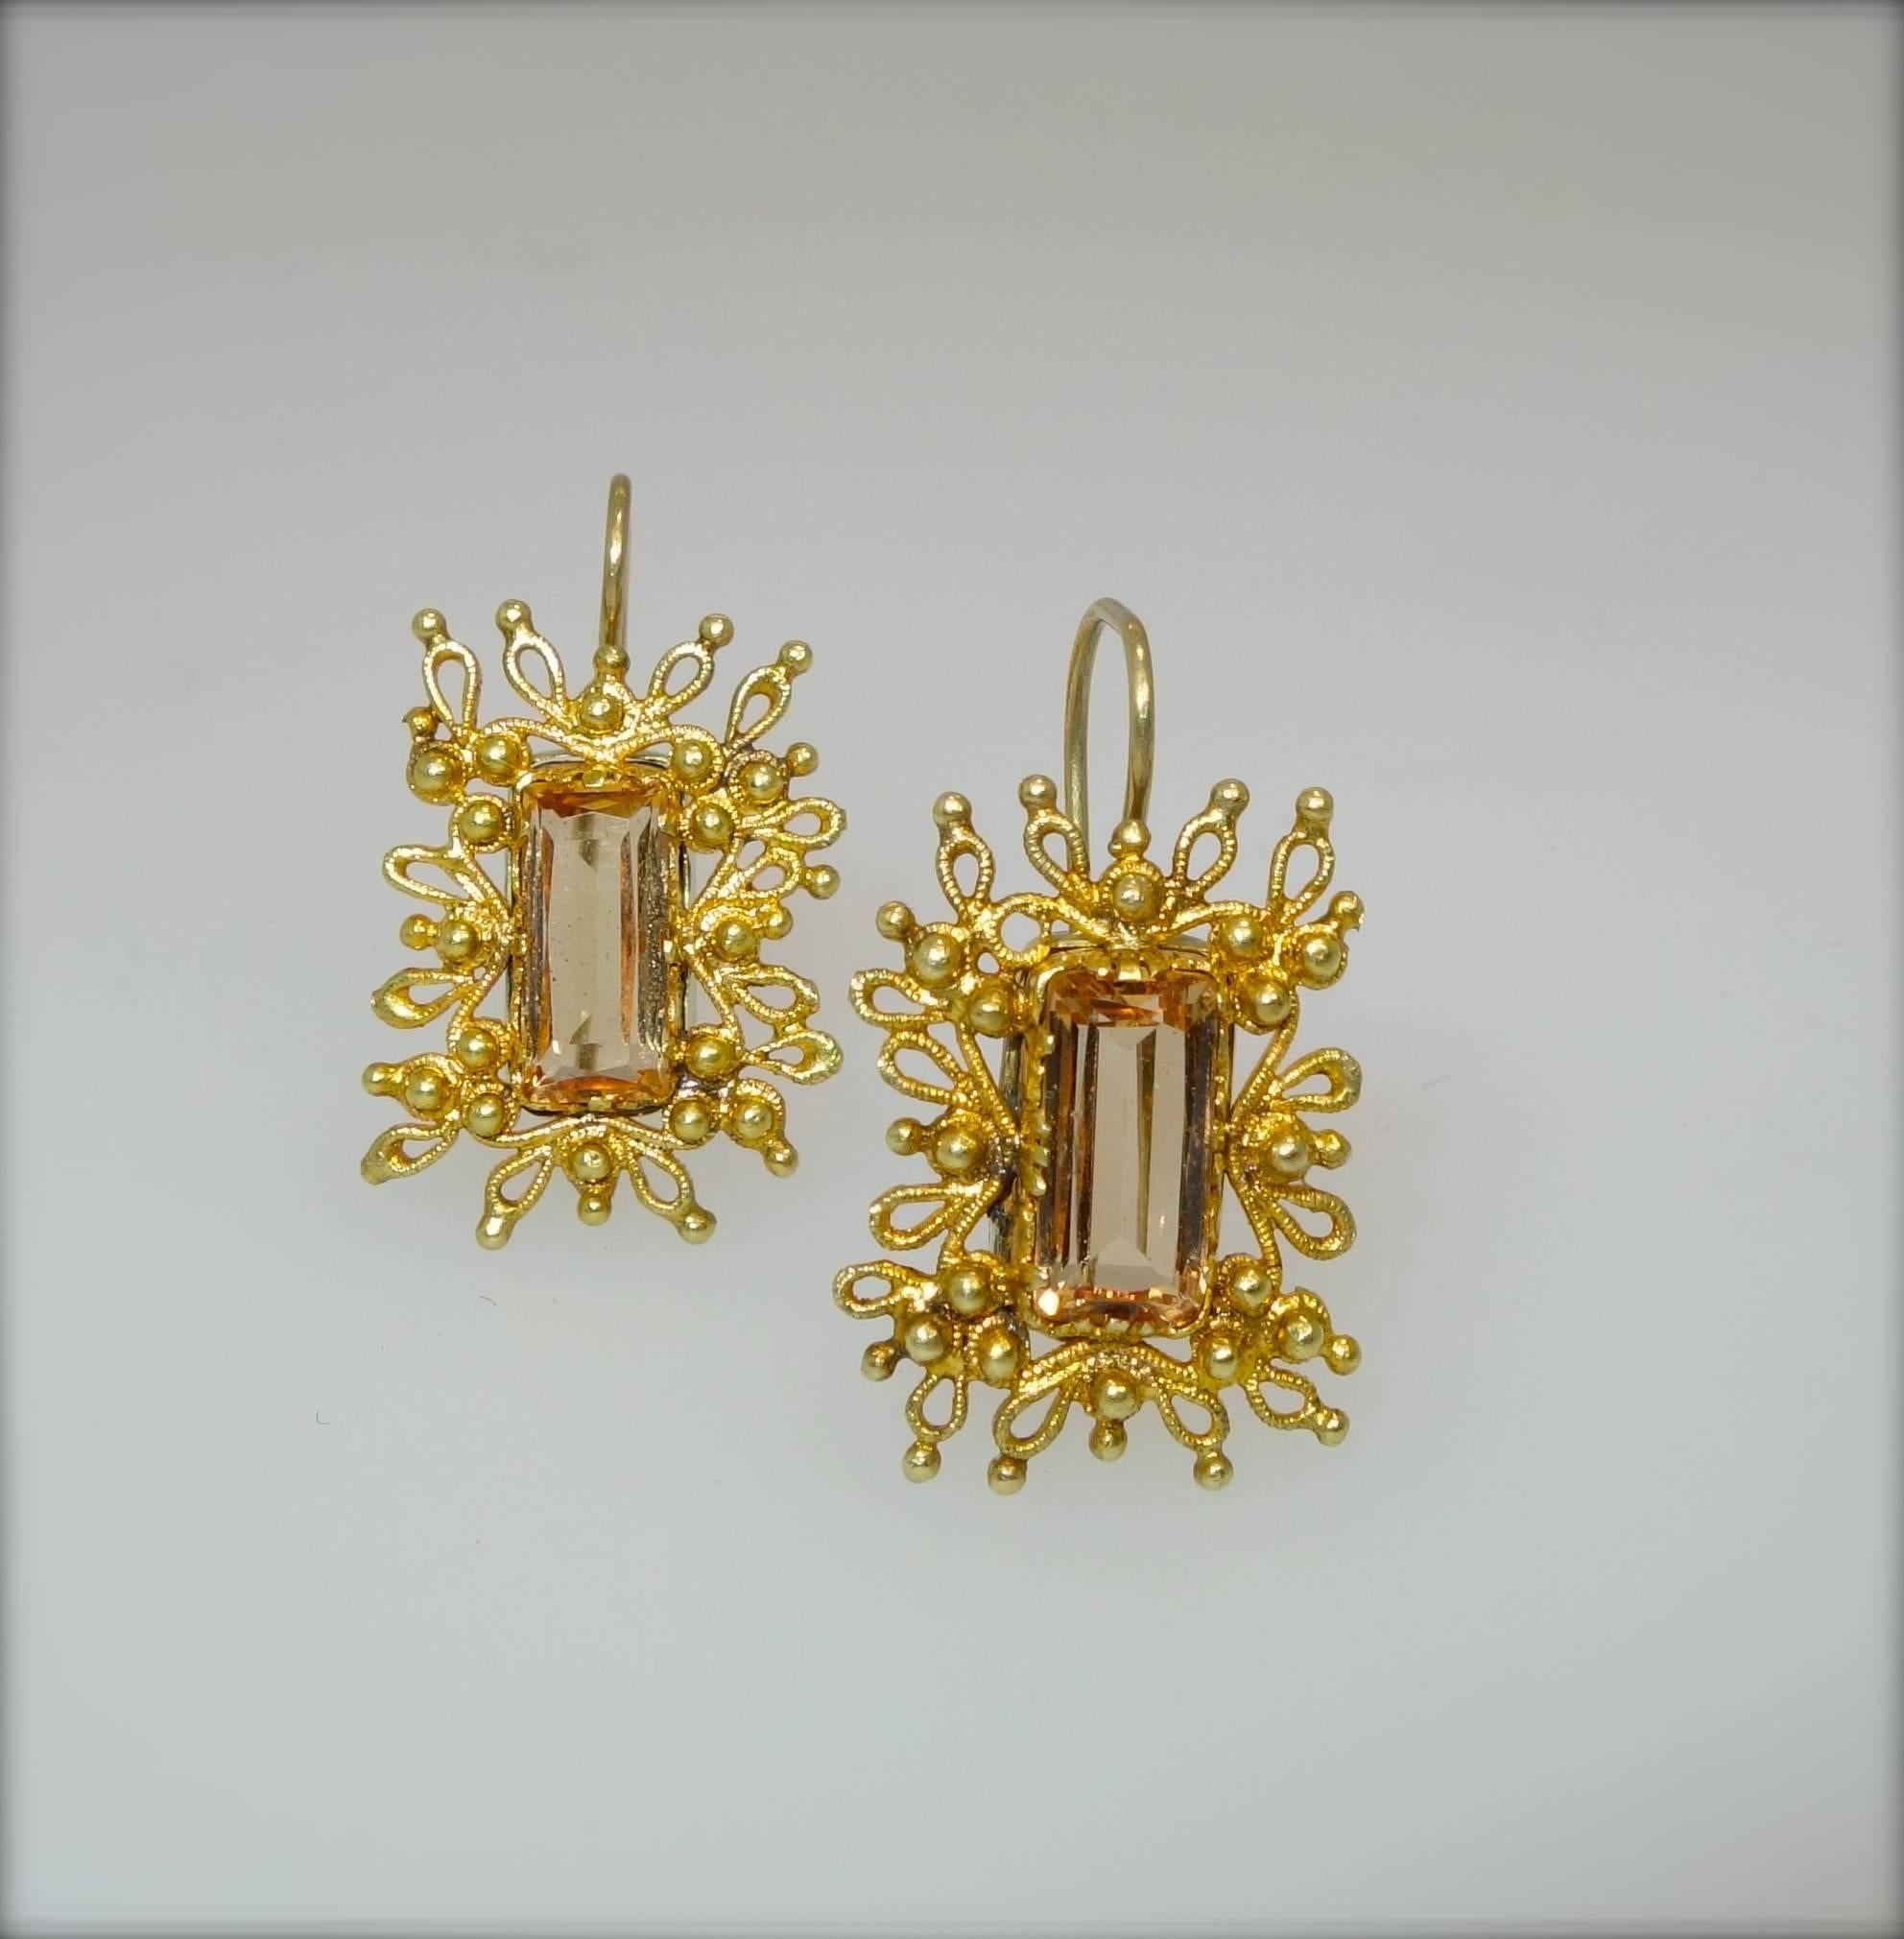 Fine cannetille gold work surround these well matched natural precious topaz stones which are accompanied by a certificate.  The earrings are .75 inches long and are in fine condition.